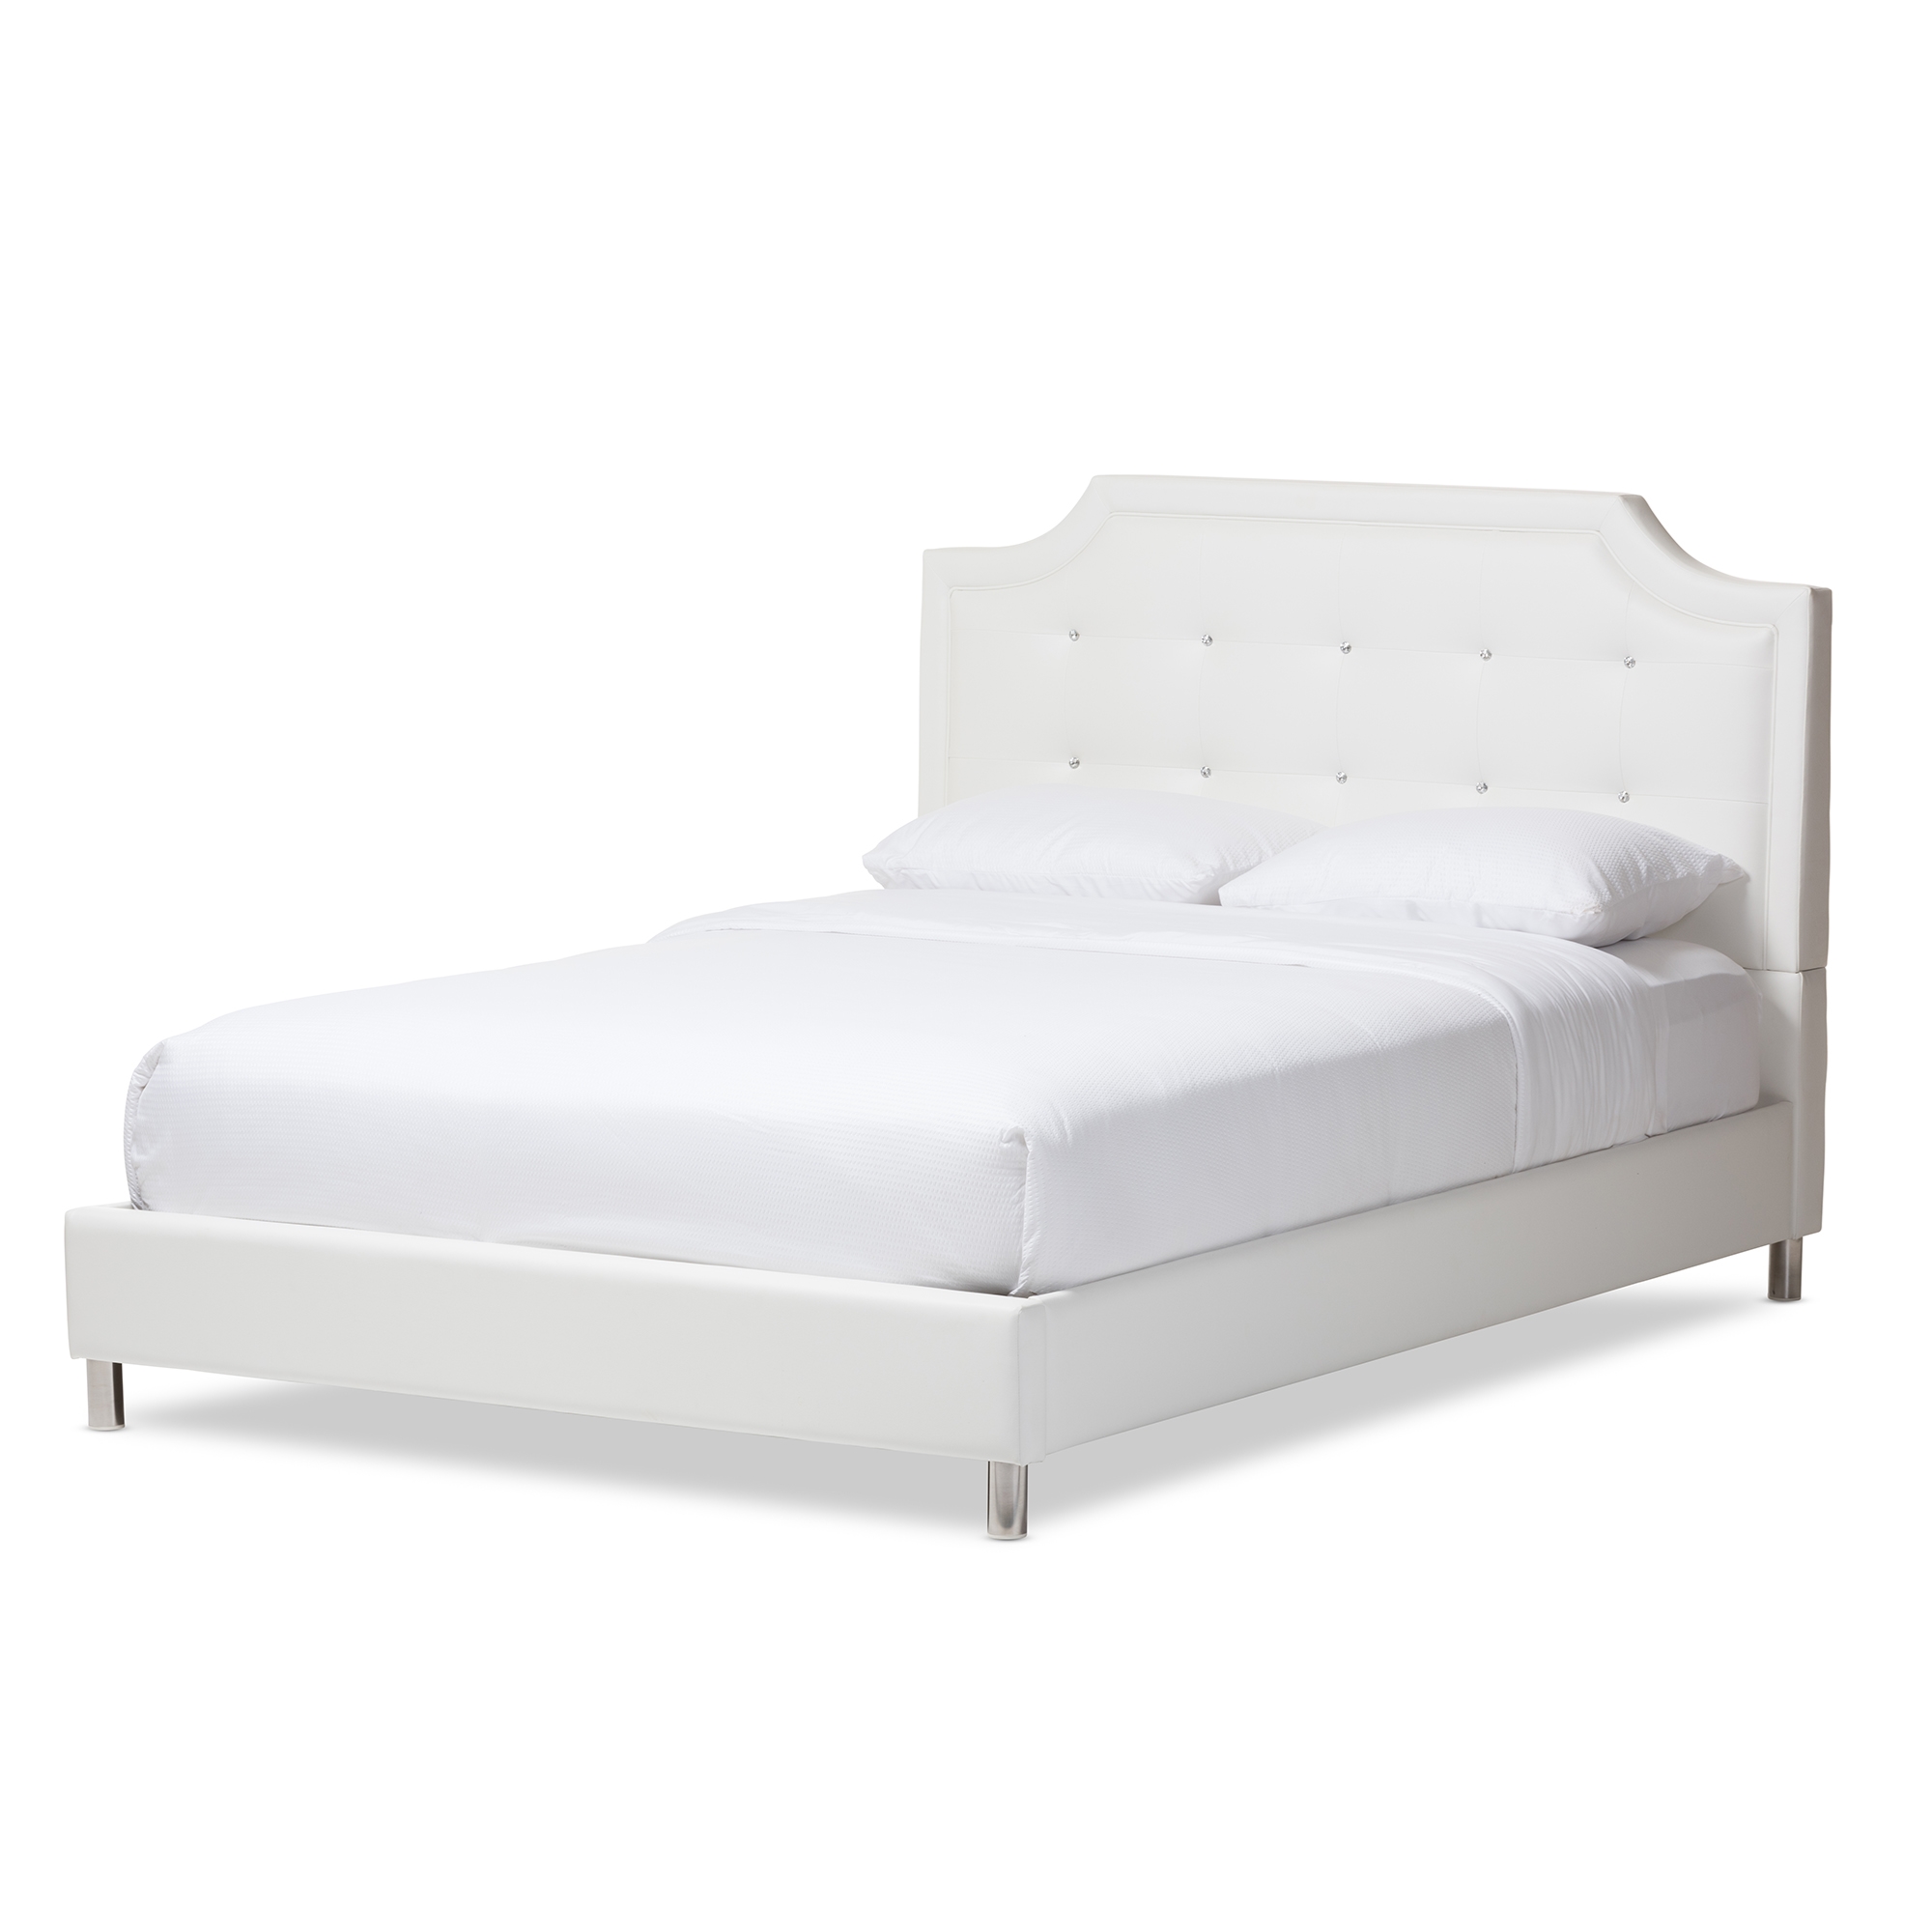 Baxton Studio Carlotta White Modern Bed With Upholstered